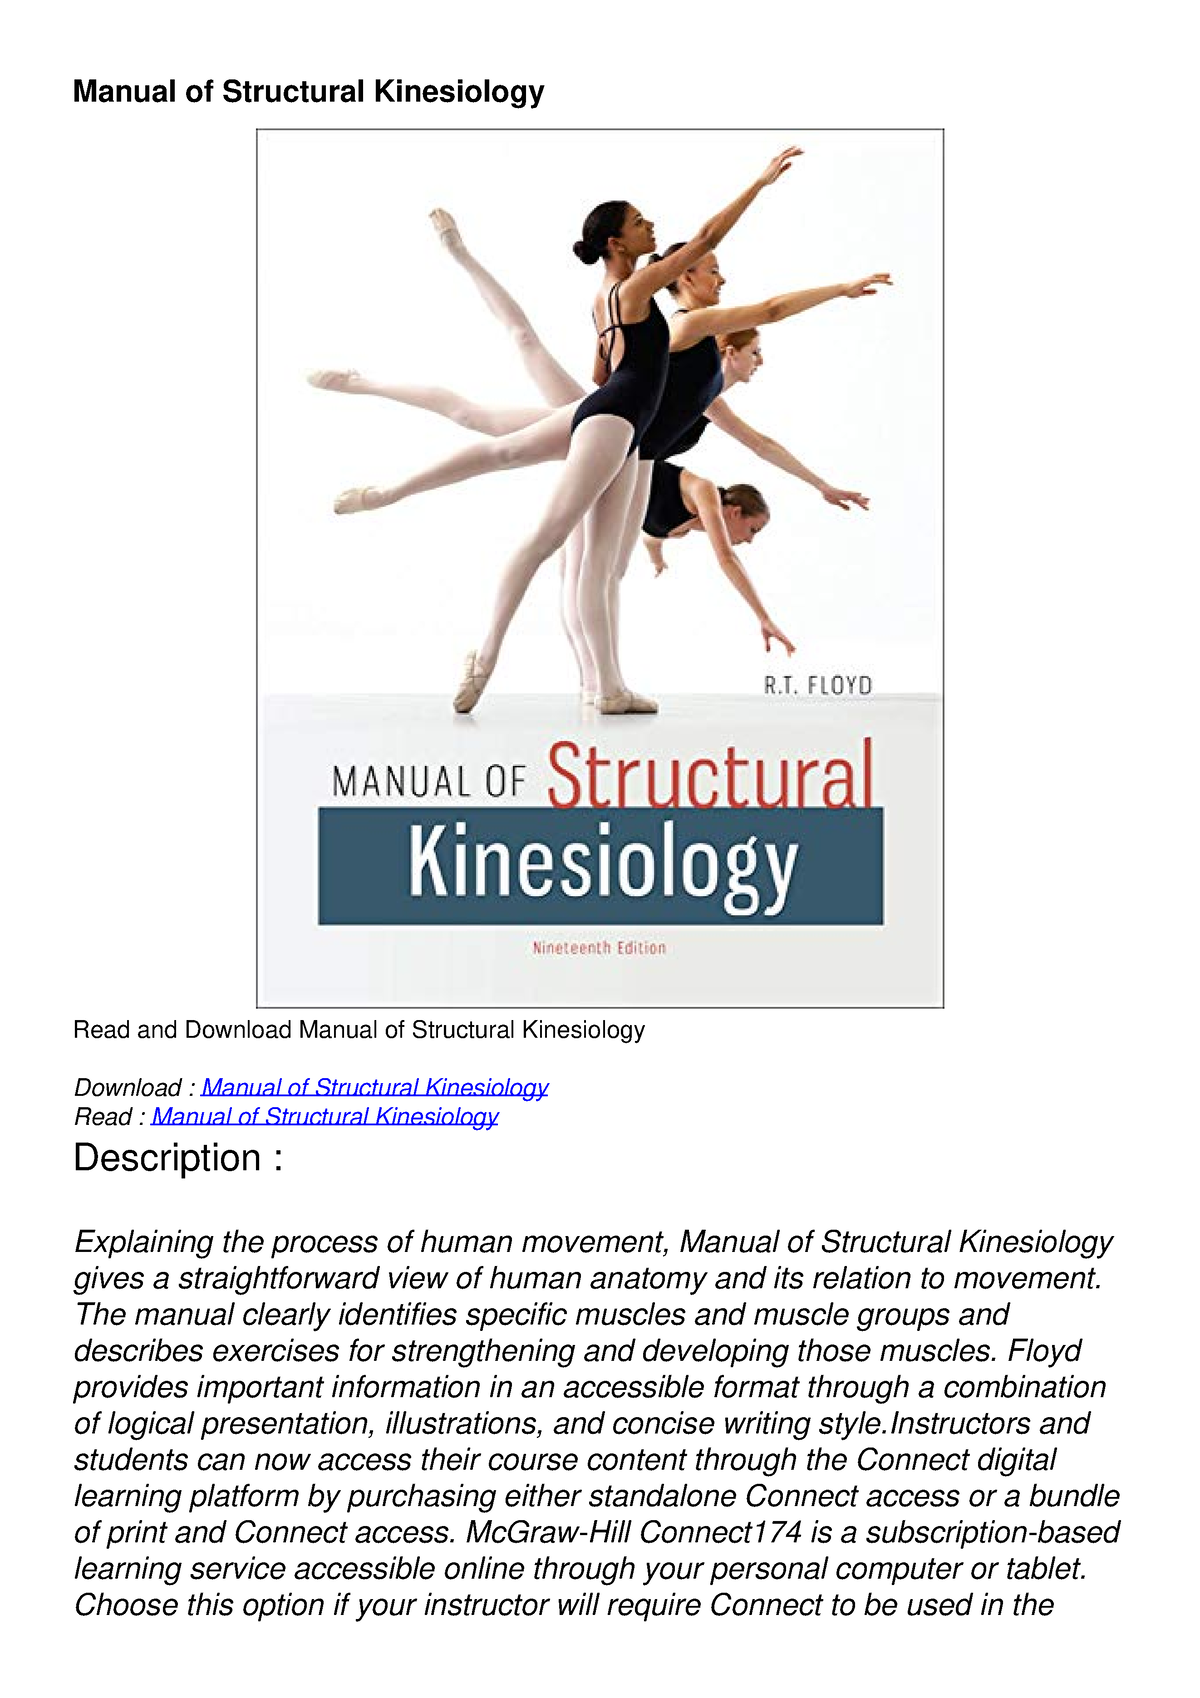 Pdf Read Online Manual Of Structural Kinesiology Manual Of Structural Kinesiology Read And 1447